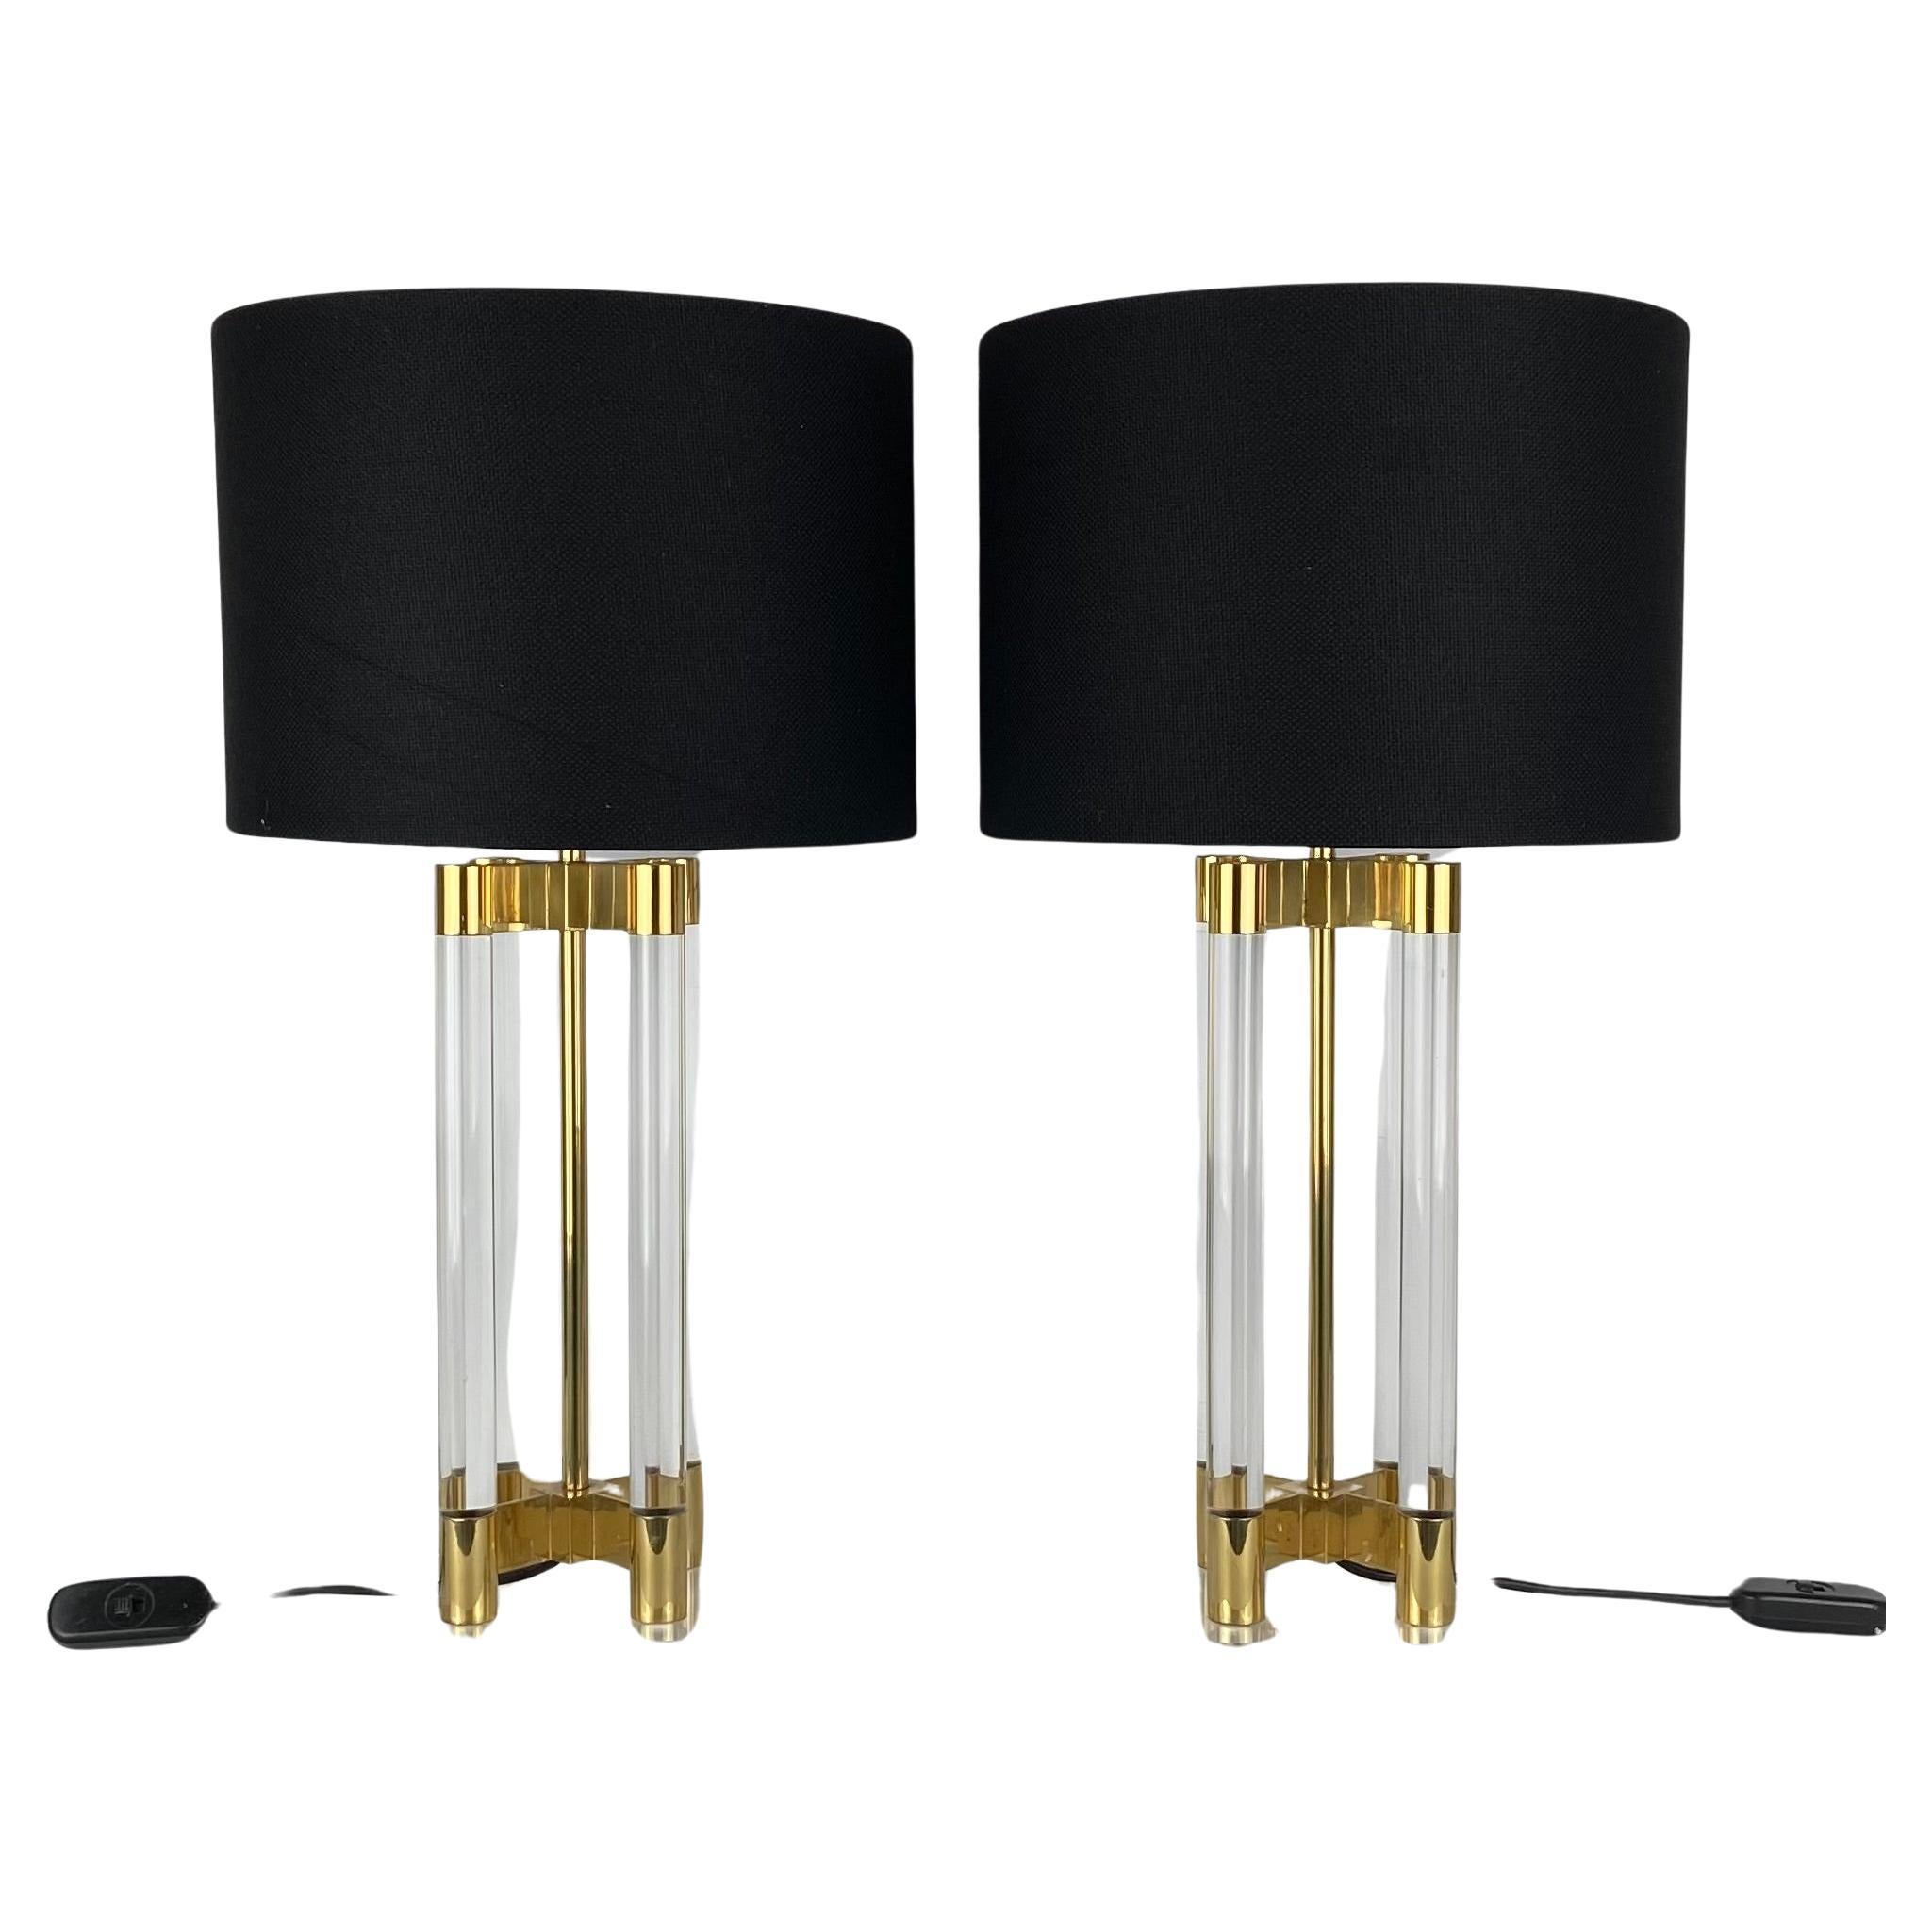 Pair of table lamps in transparant cylinders in lucite, held together by a base and top in brass. In the center is a brass pipe with the fitting on top of it.
Black fabric shades.